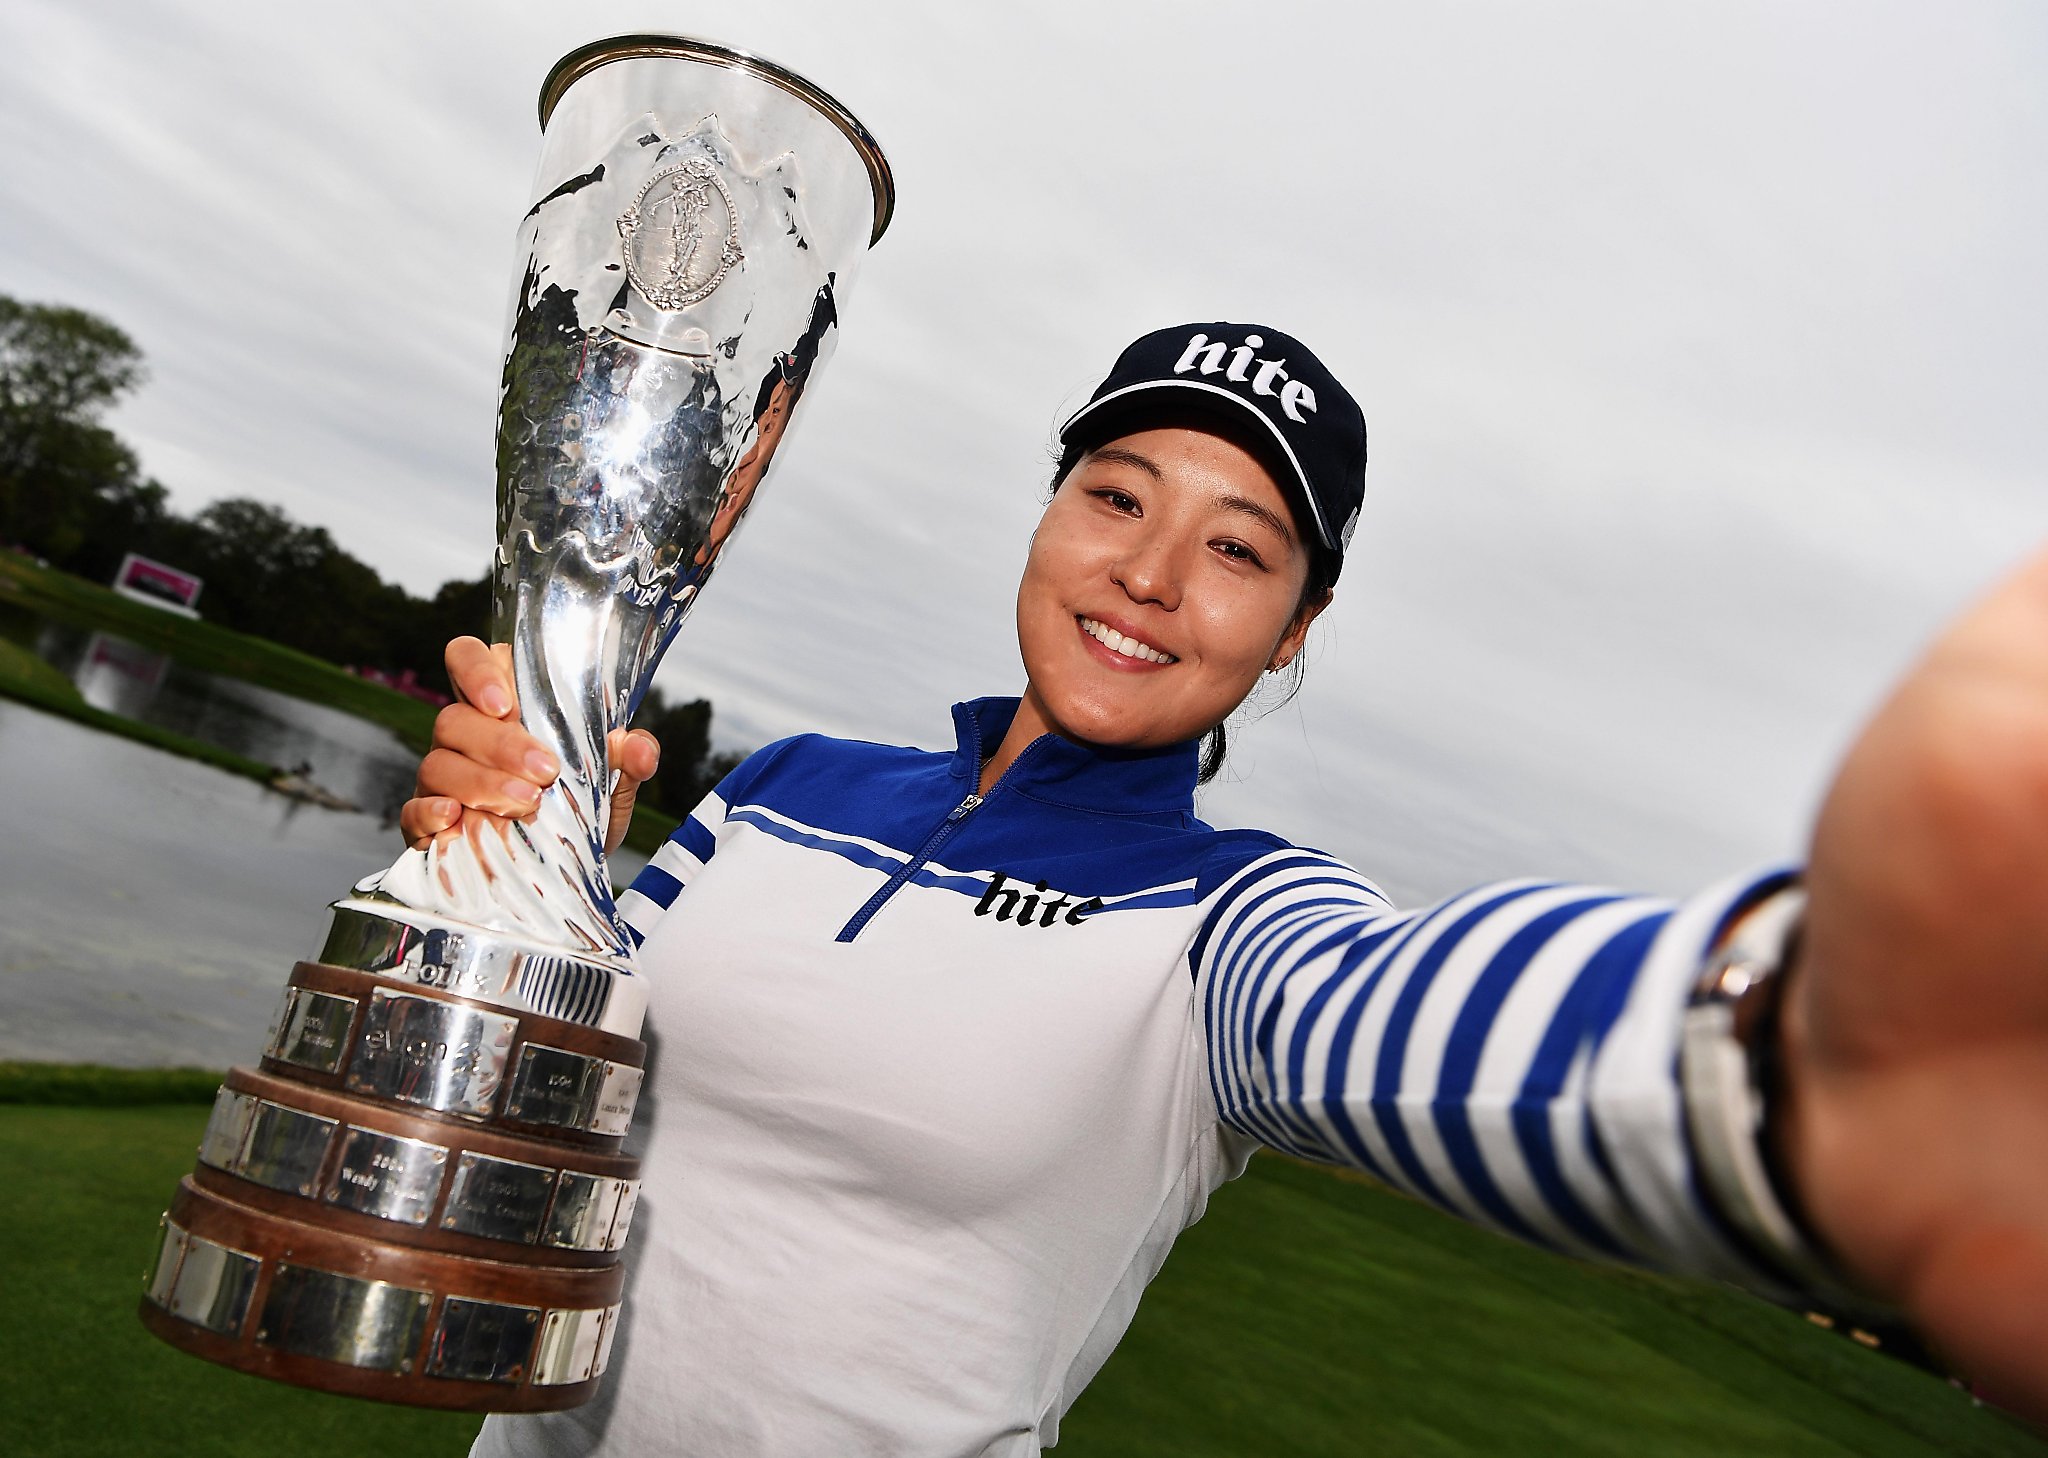 In Gee Chun wins Evian Championship with record round in major.